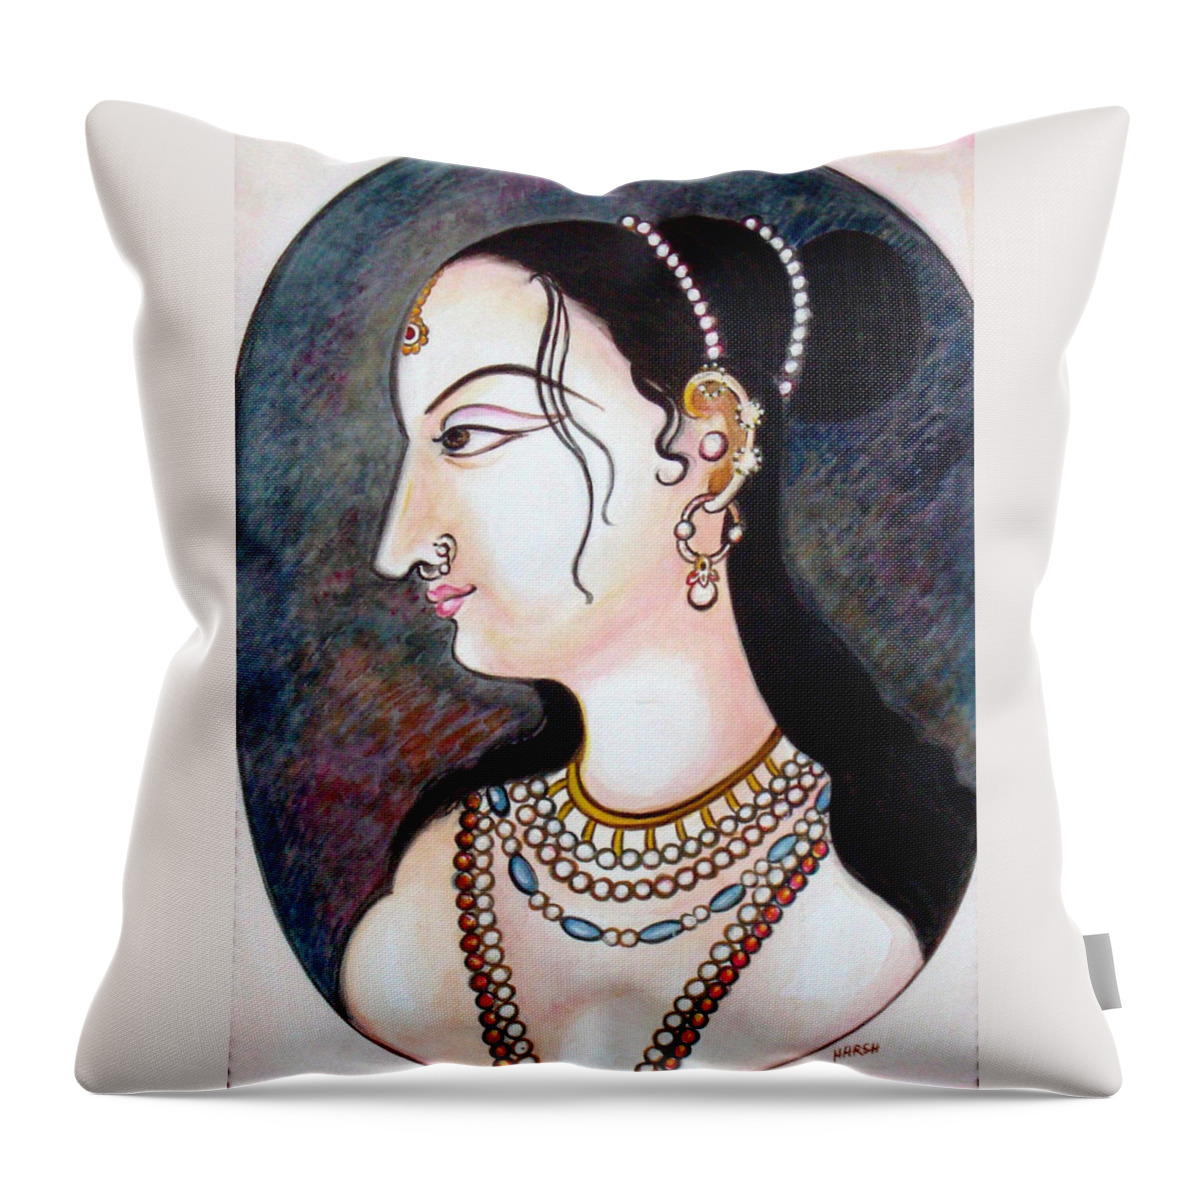 Bejeweled Throw Pillow featuring the painting Bejewelled by Harsh Malik